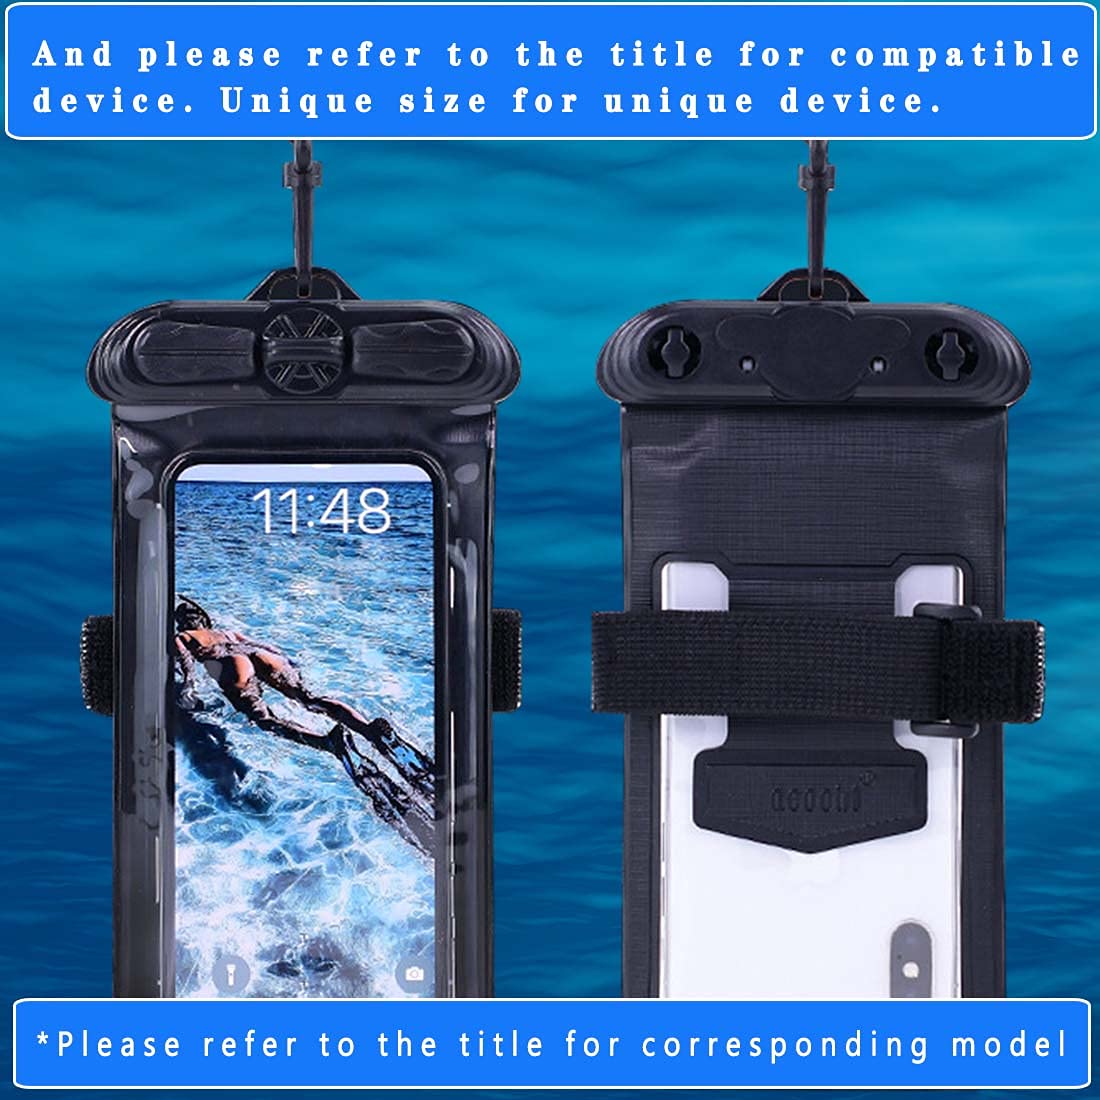 Puccy Case Cover, Compatible with Innioasis G1 MP3 Player Black Waterproof Pouch Dry Bag (Not Screen Protector Film)